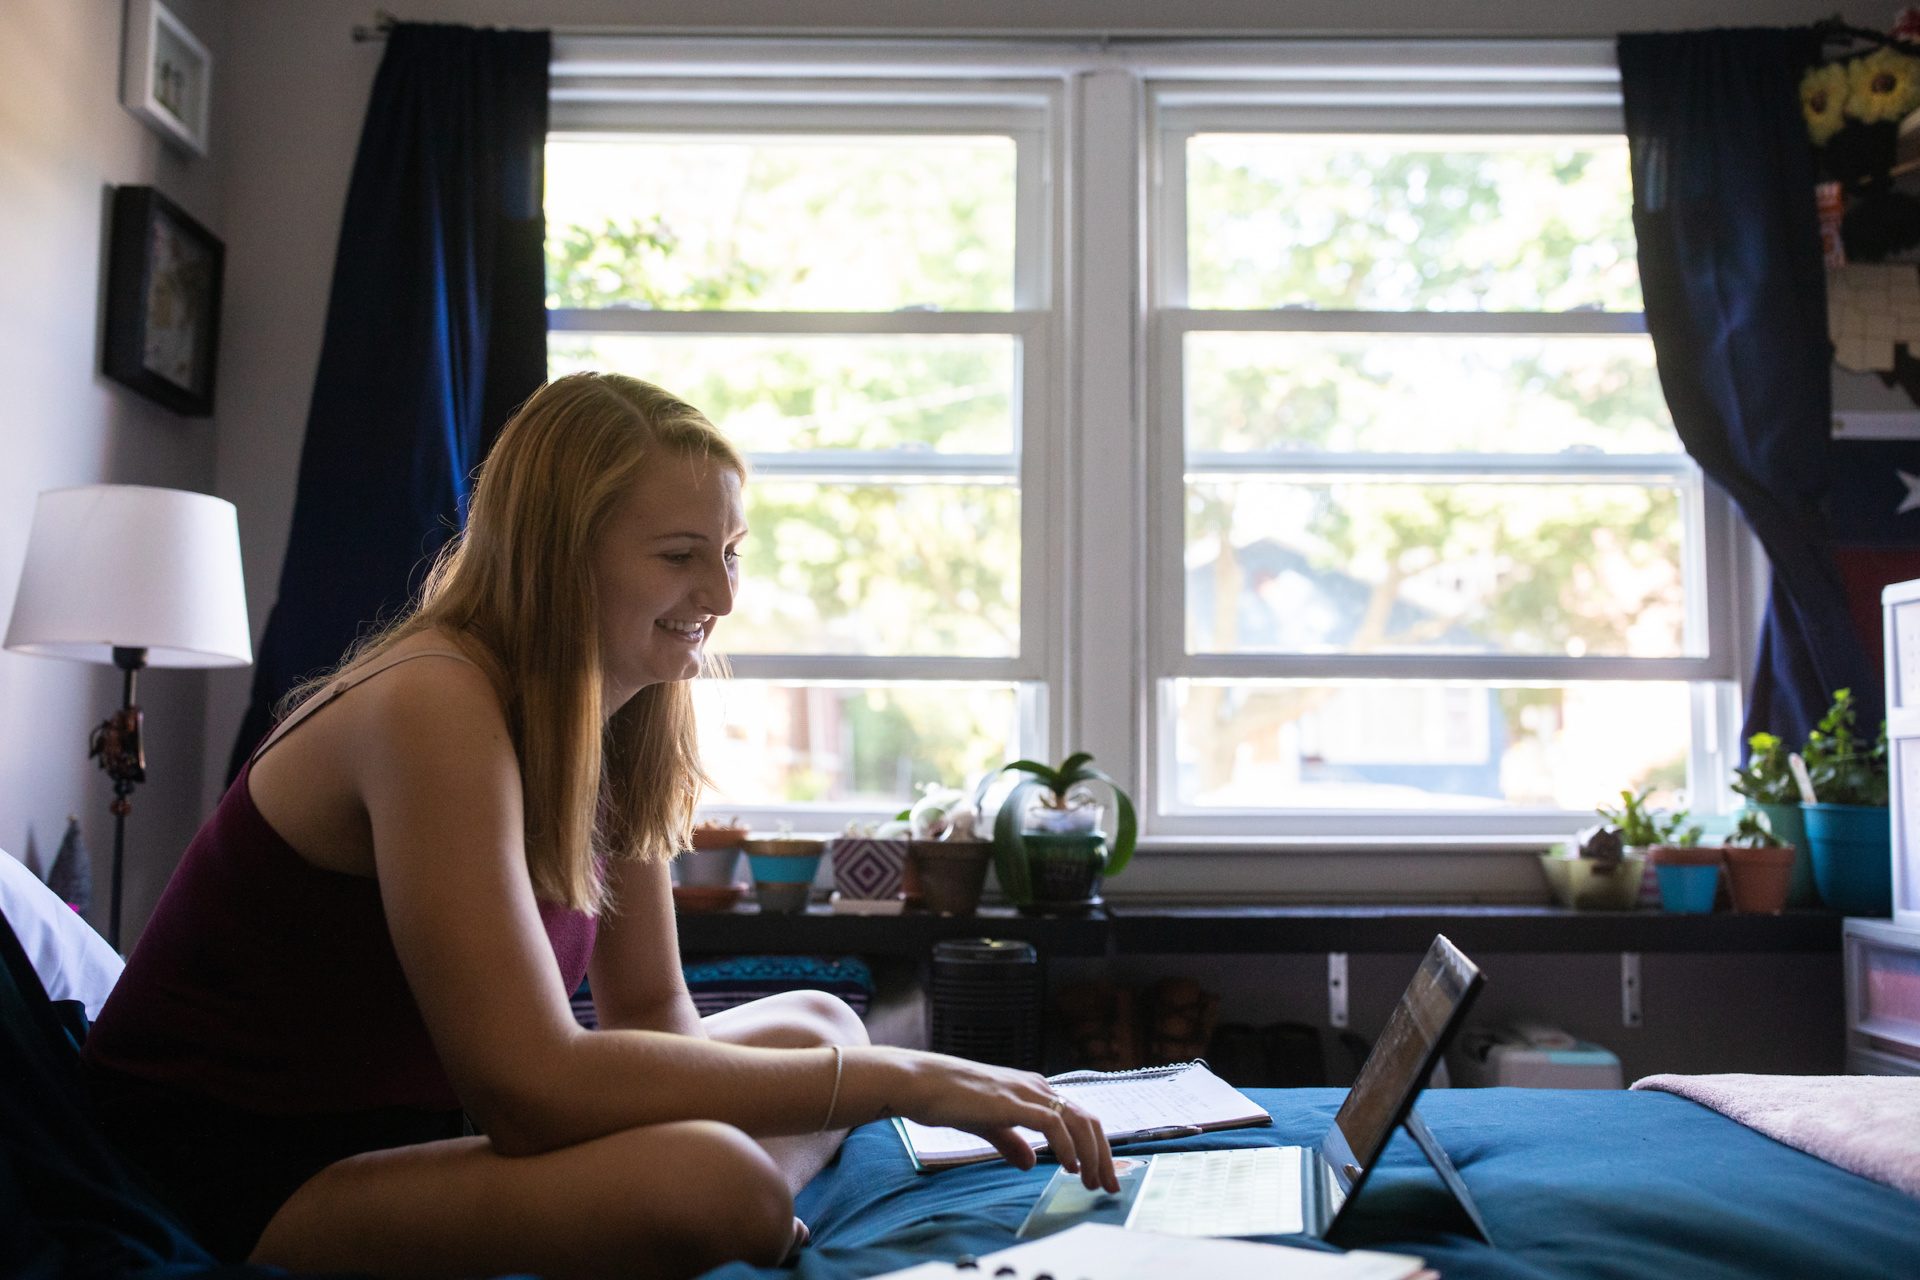 Girl sitting on bed working on a laptop.